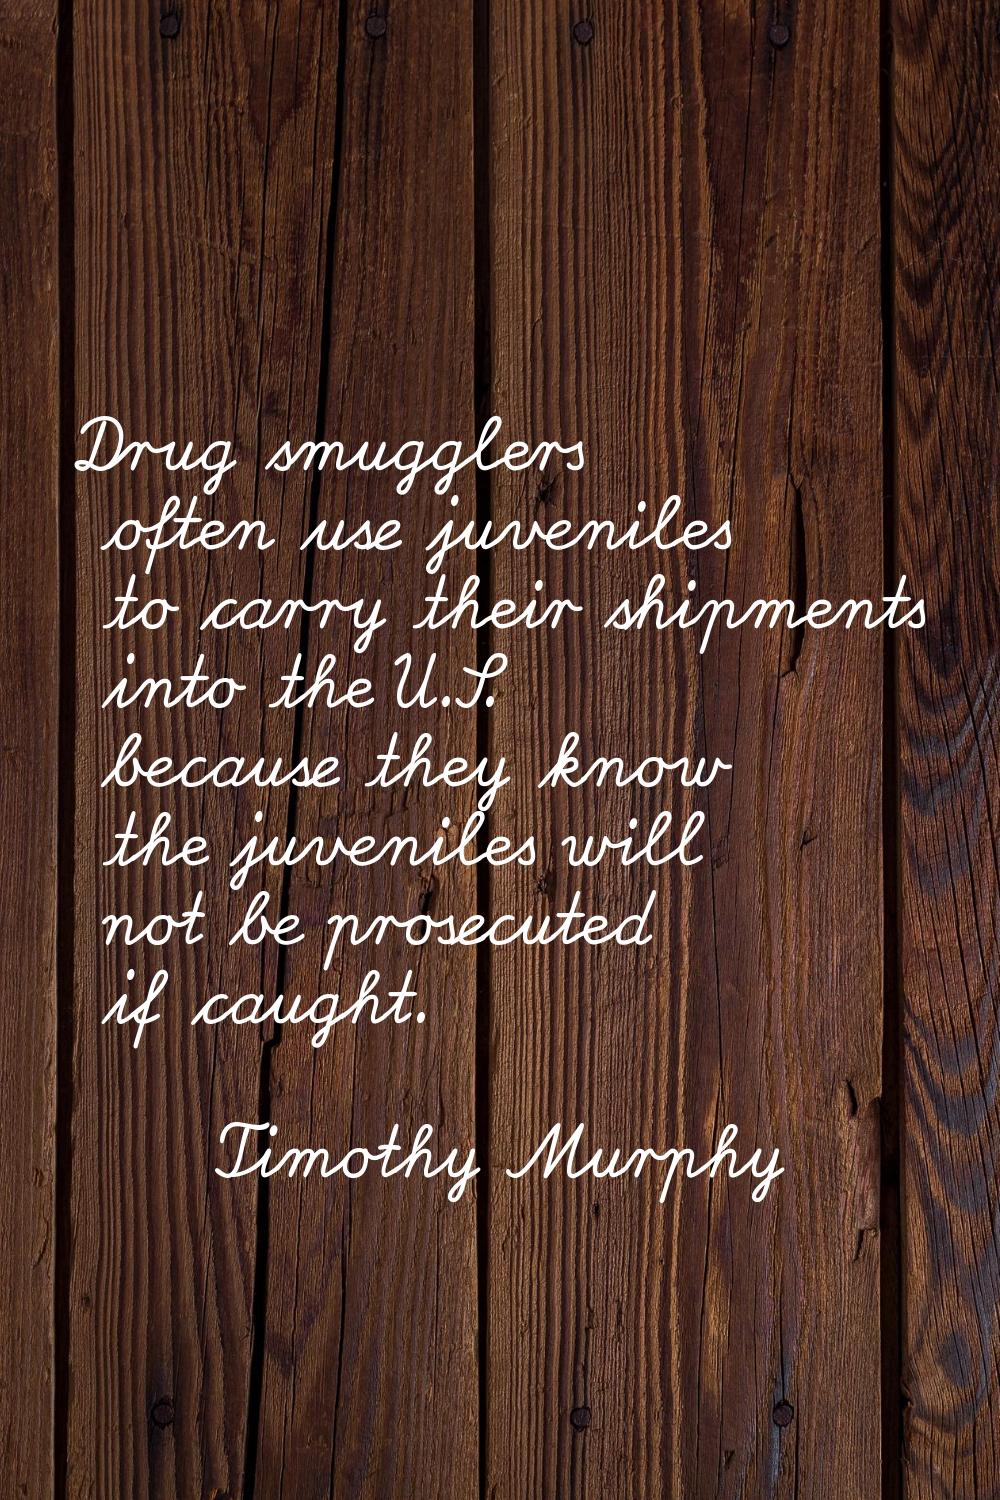 Drug smugglers often use juveniles to carry their shipments into the U.S. because they know the juv